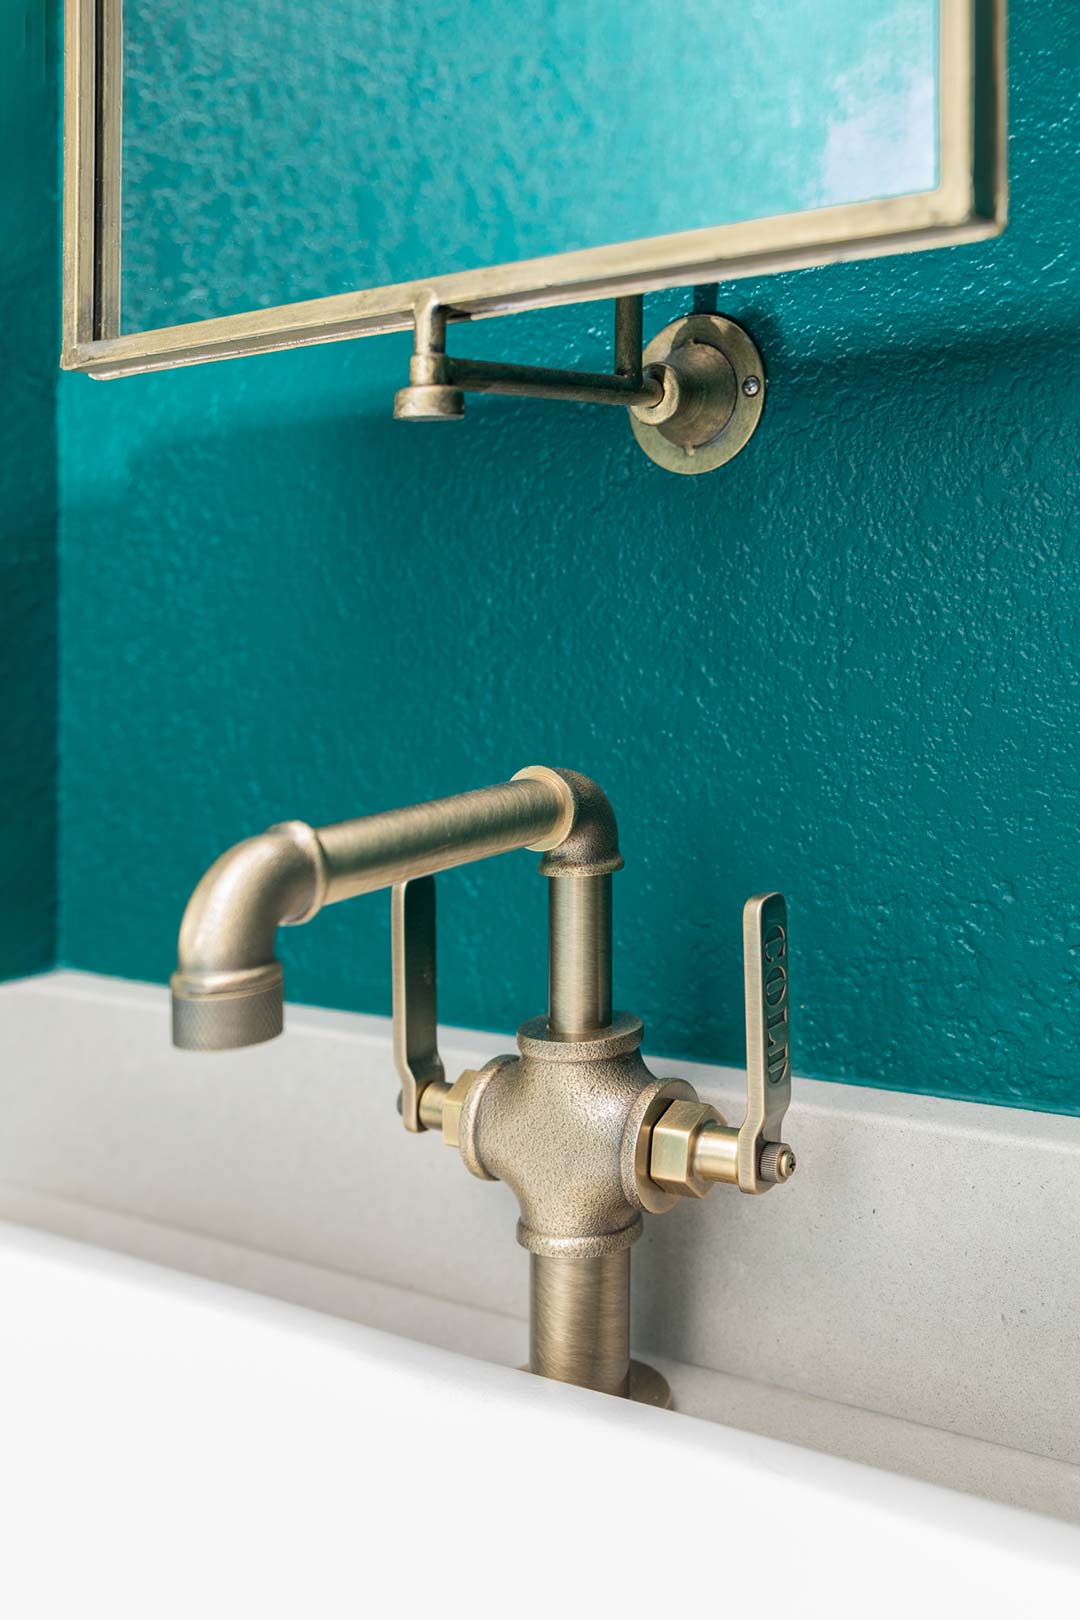 Unique plumbing fixture featured in the powder bath that is brass and matches the vanity mirror installed above it.